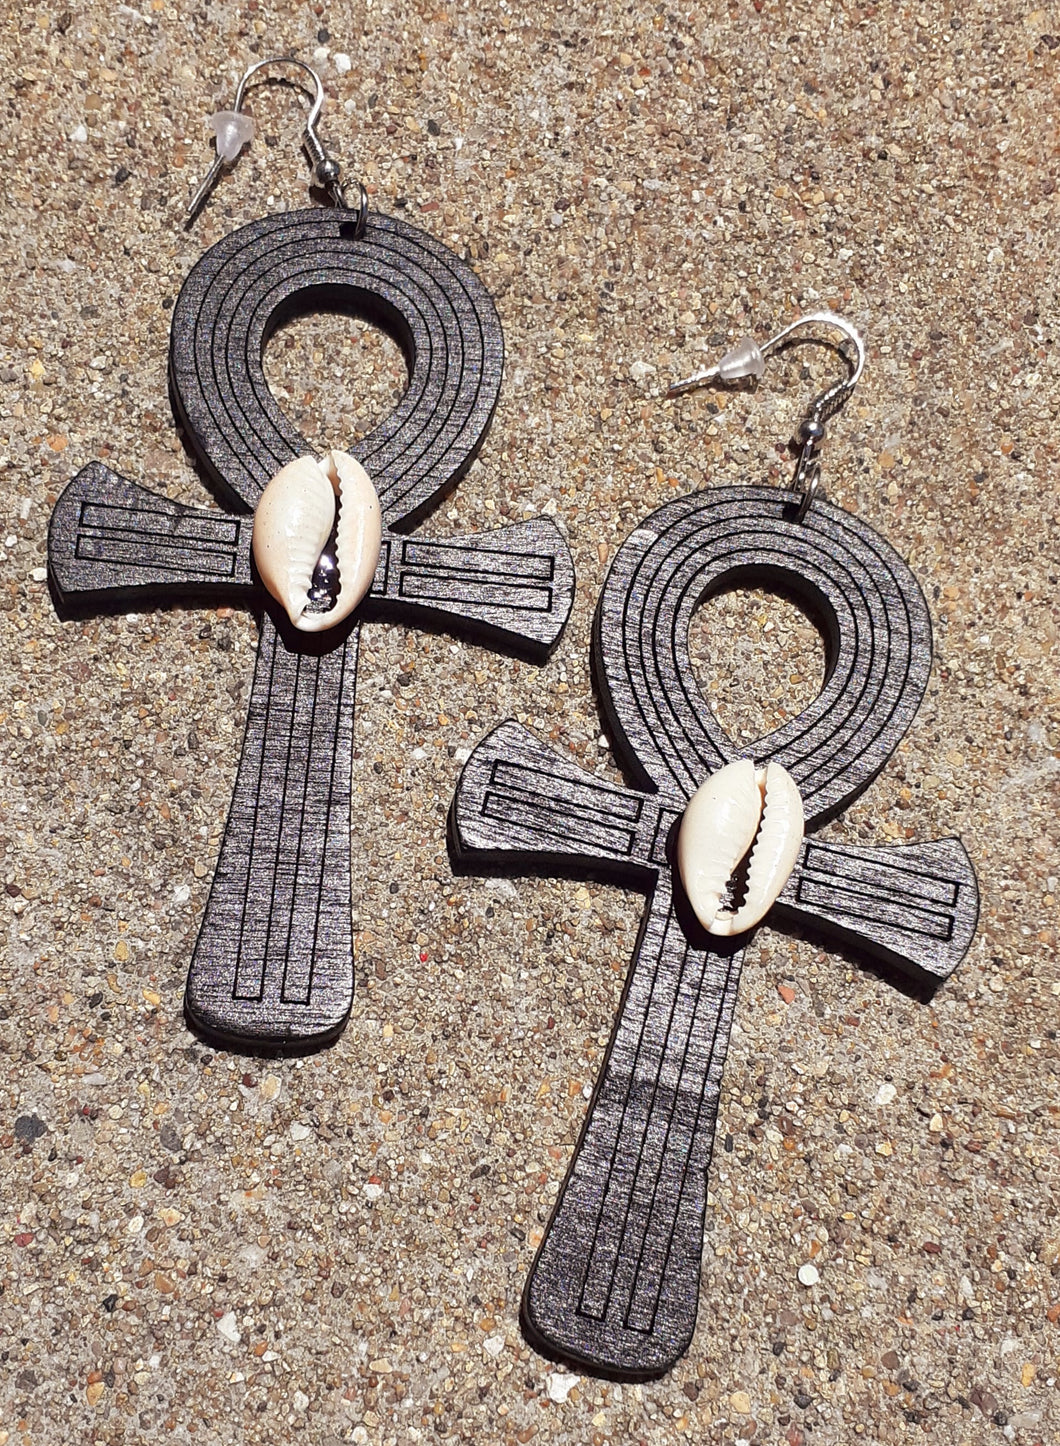 Carved Wood and Cowrie Shell Ankh Earrings Kargo Fresh